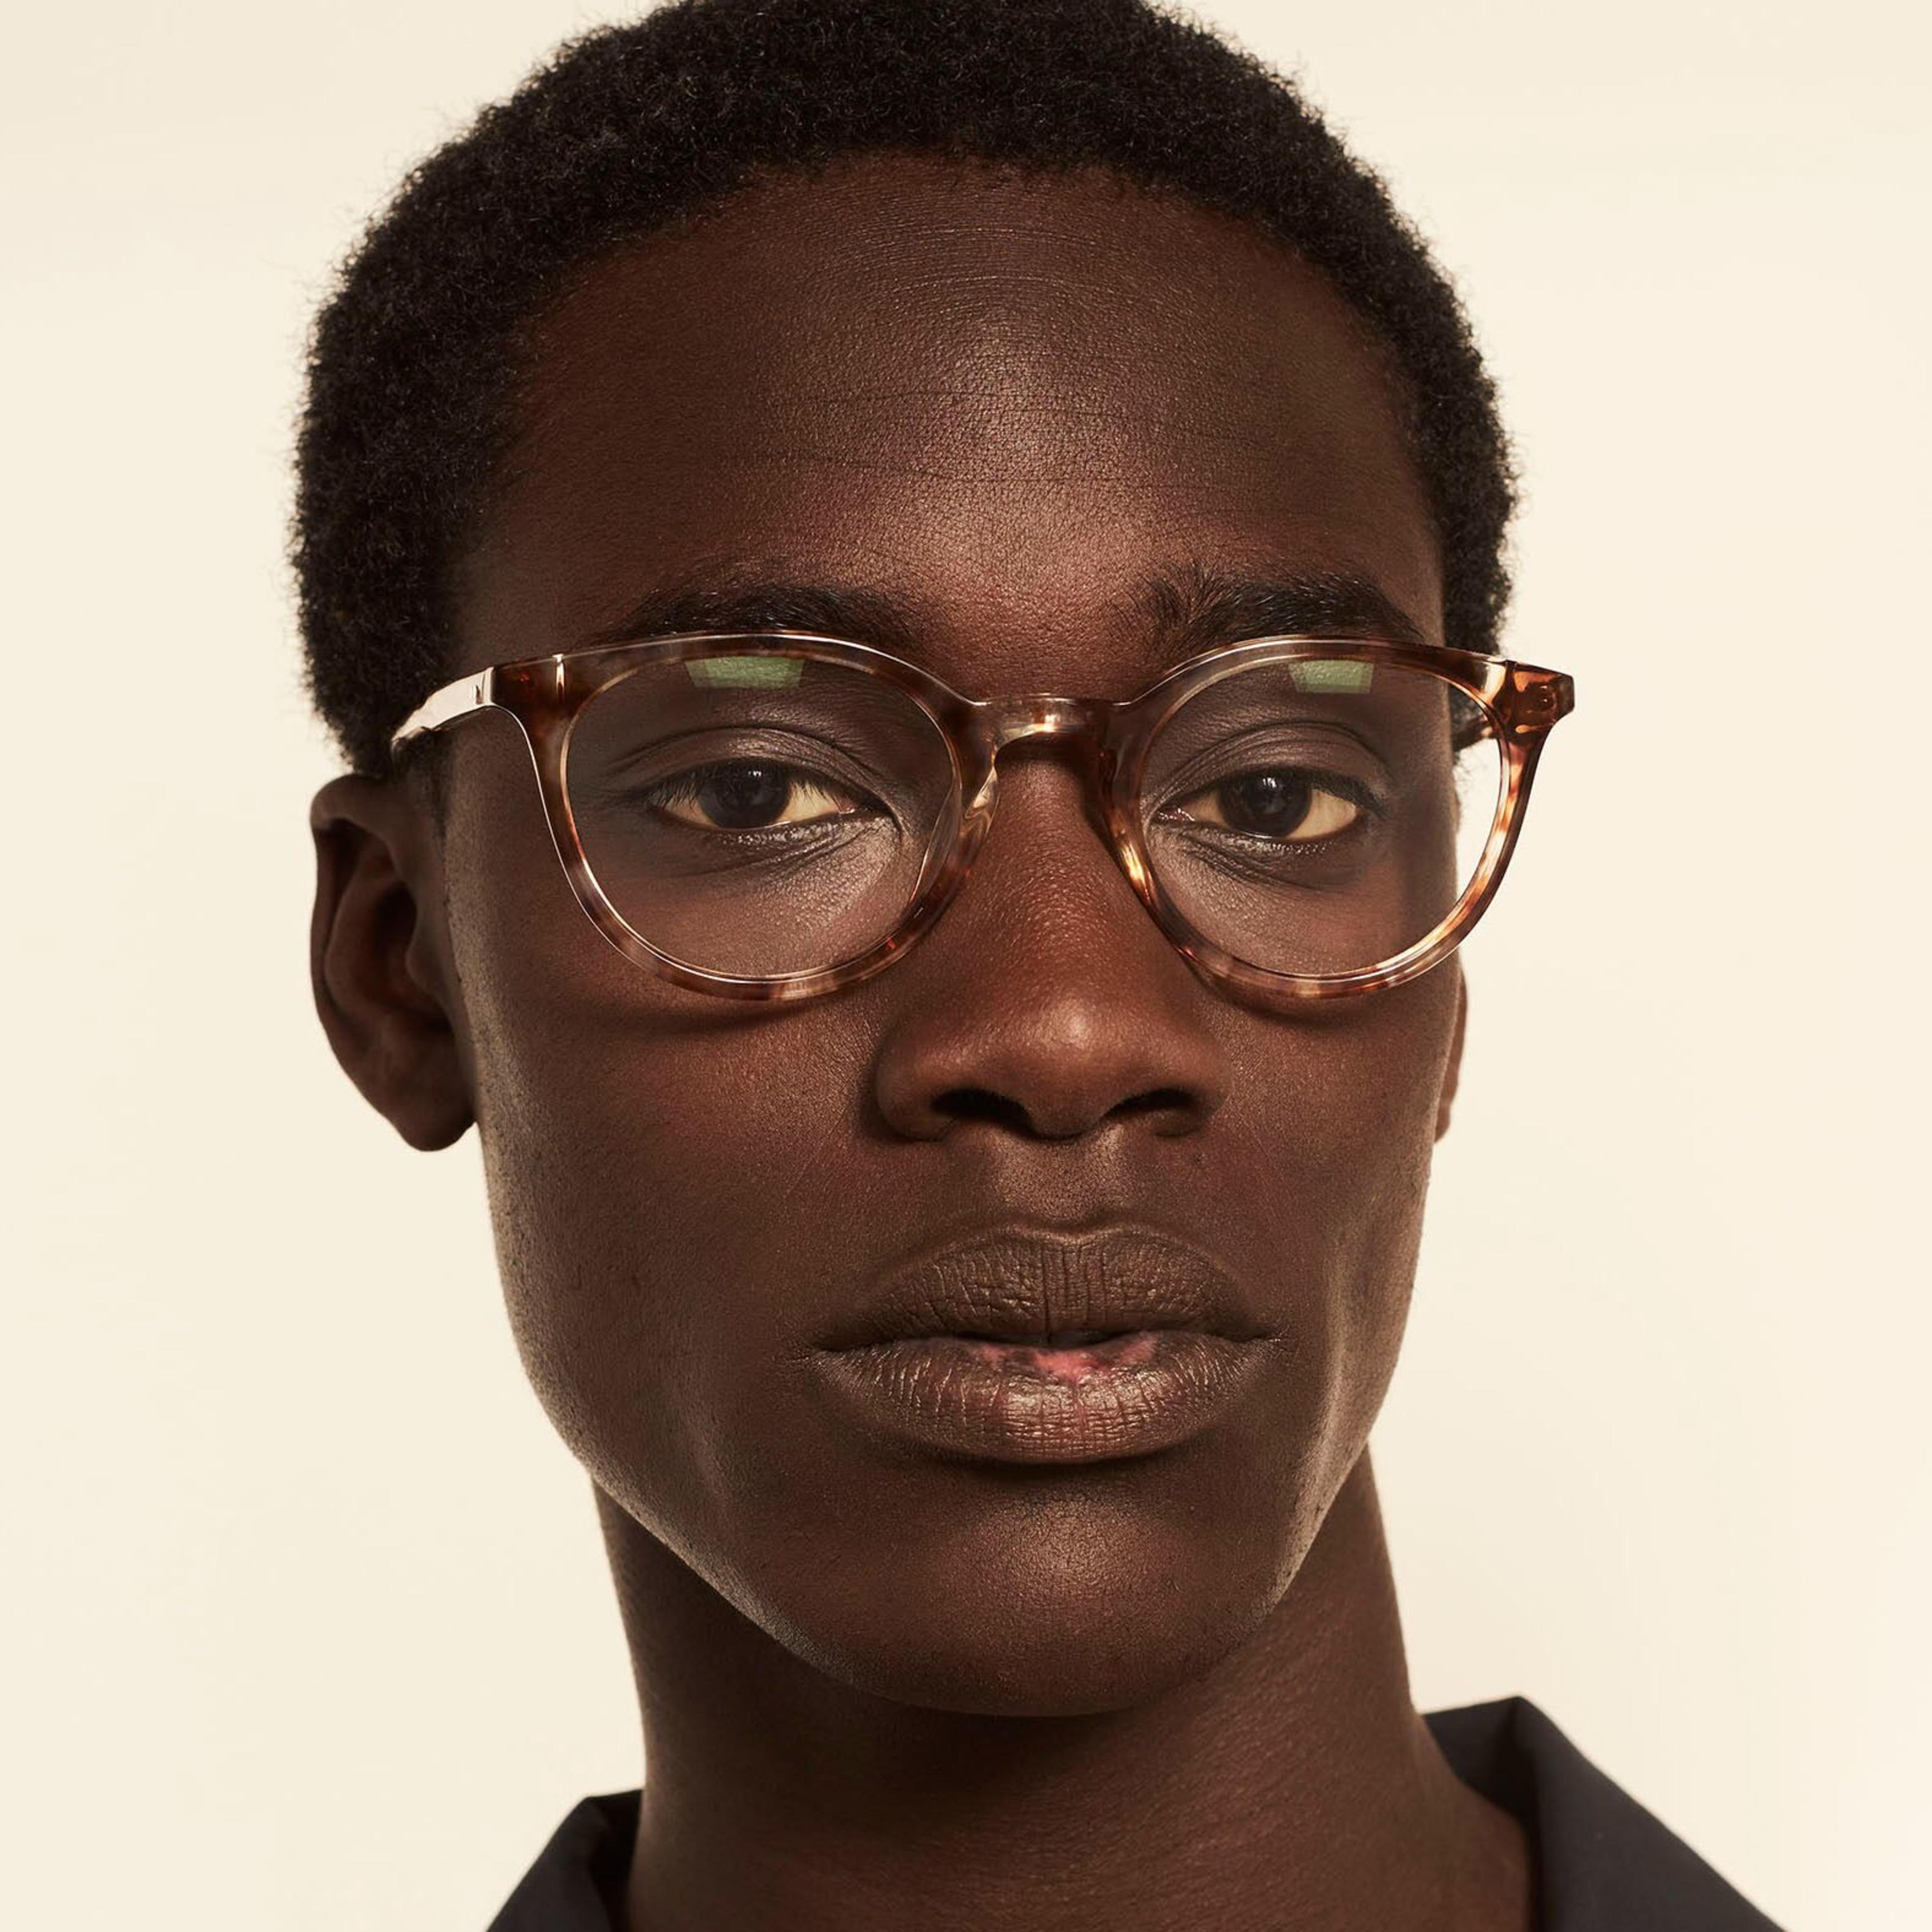 Ace & Tate Glasses | Round Acetate in Brown, Clear